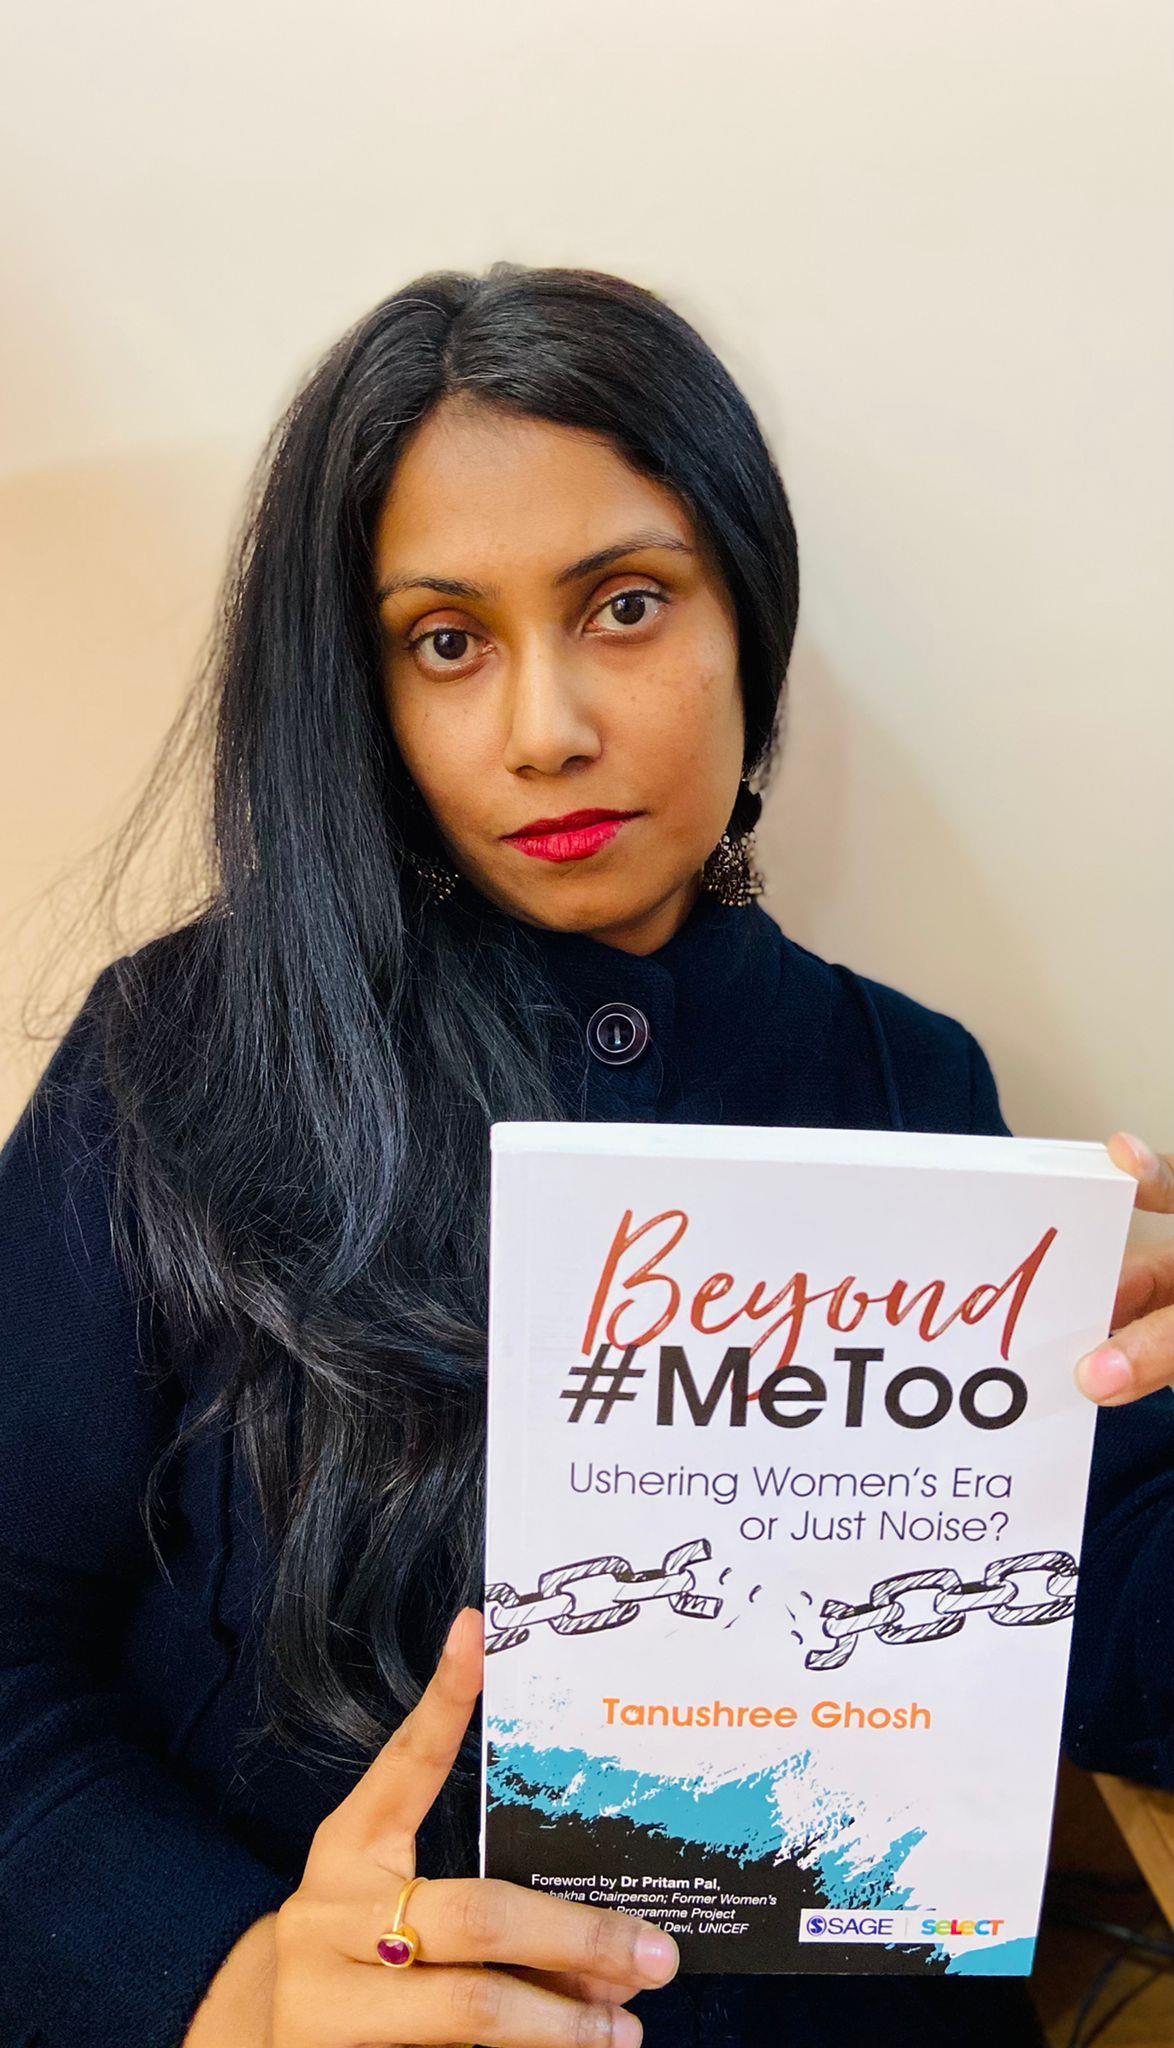 Tanushree Ghosh’s book Beyond #MeToo: Ushering Women’s Era or Just Noise? is a comprehensible account of the movement